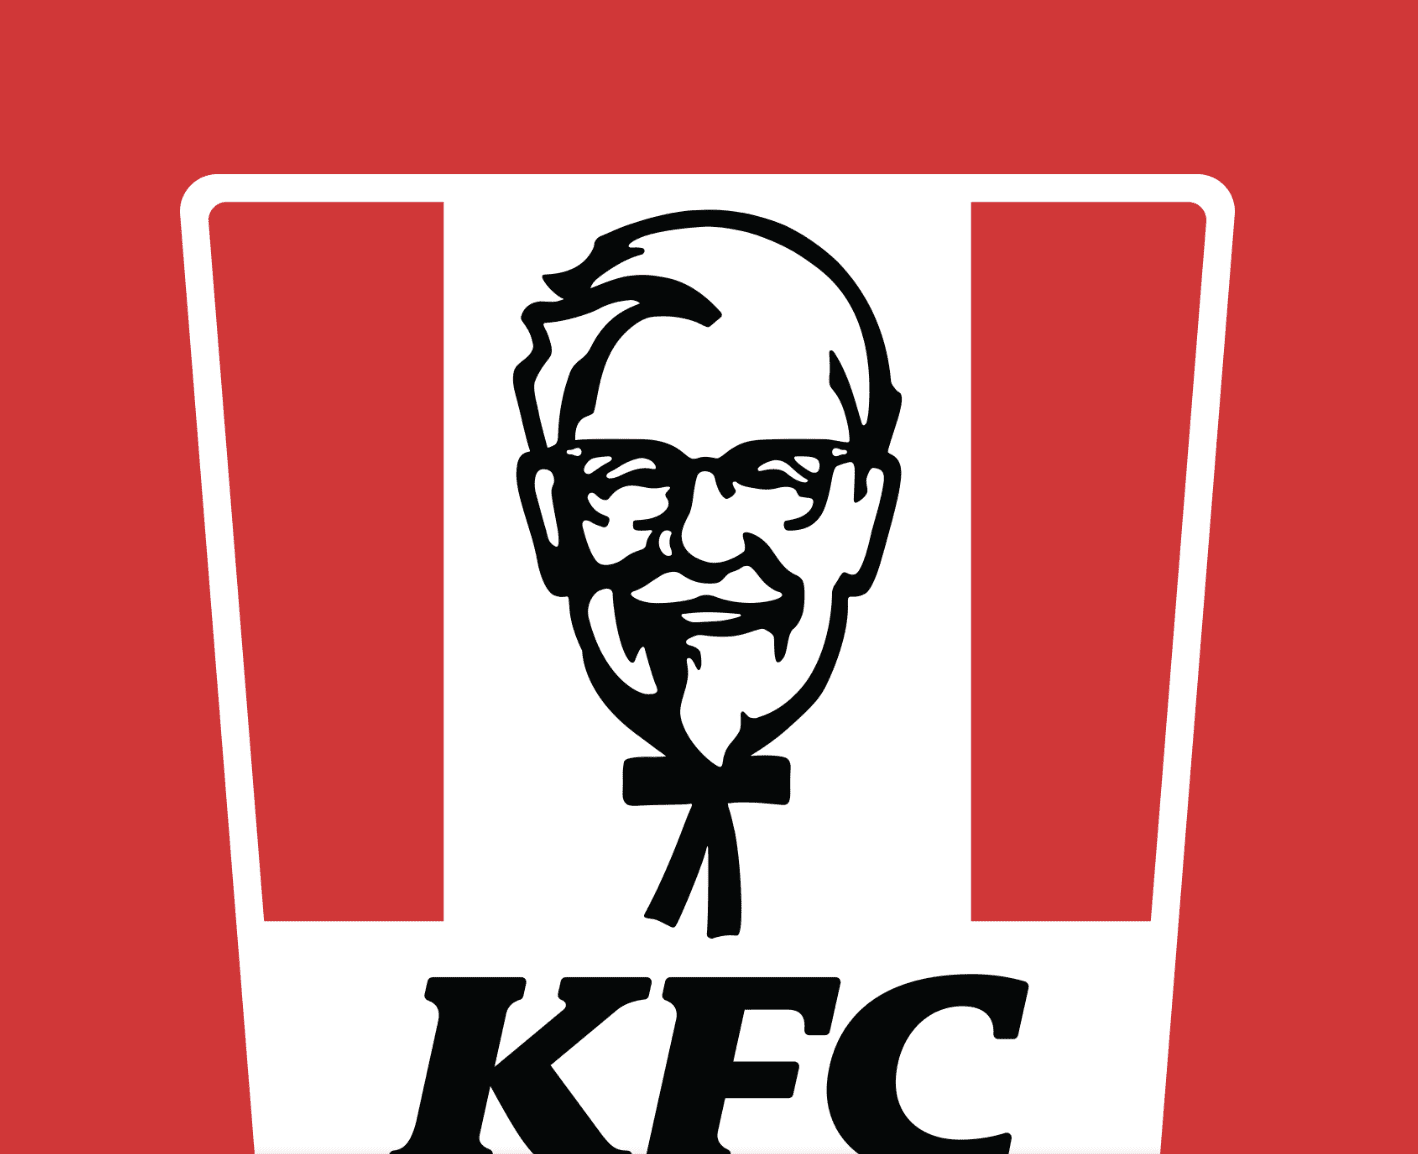 KFC logo for the company about the new fries the company will make.